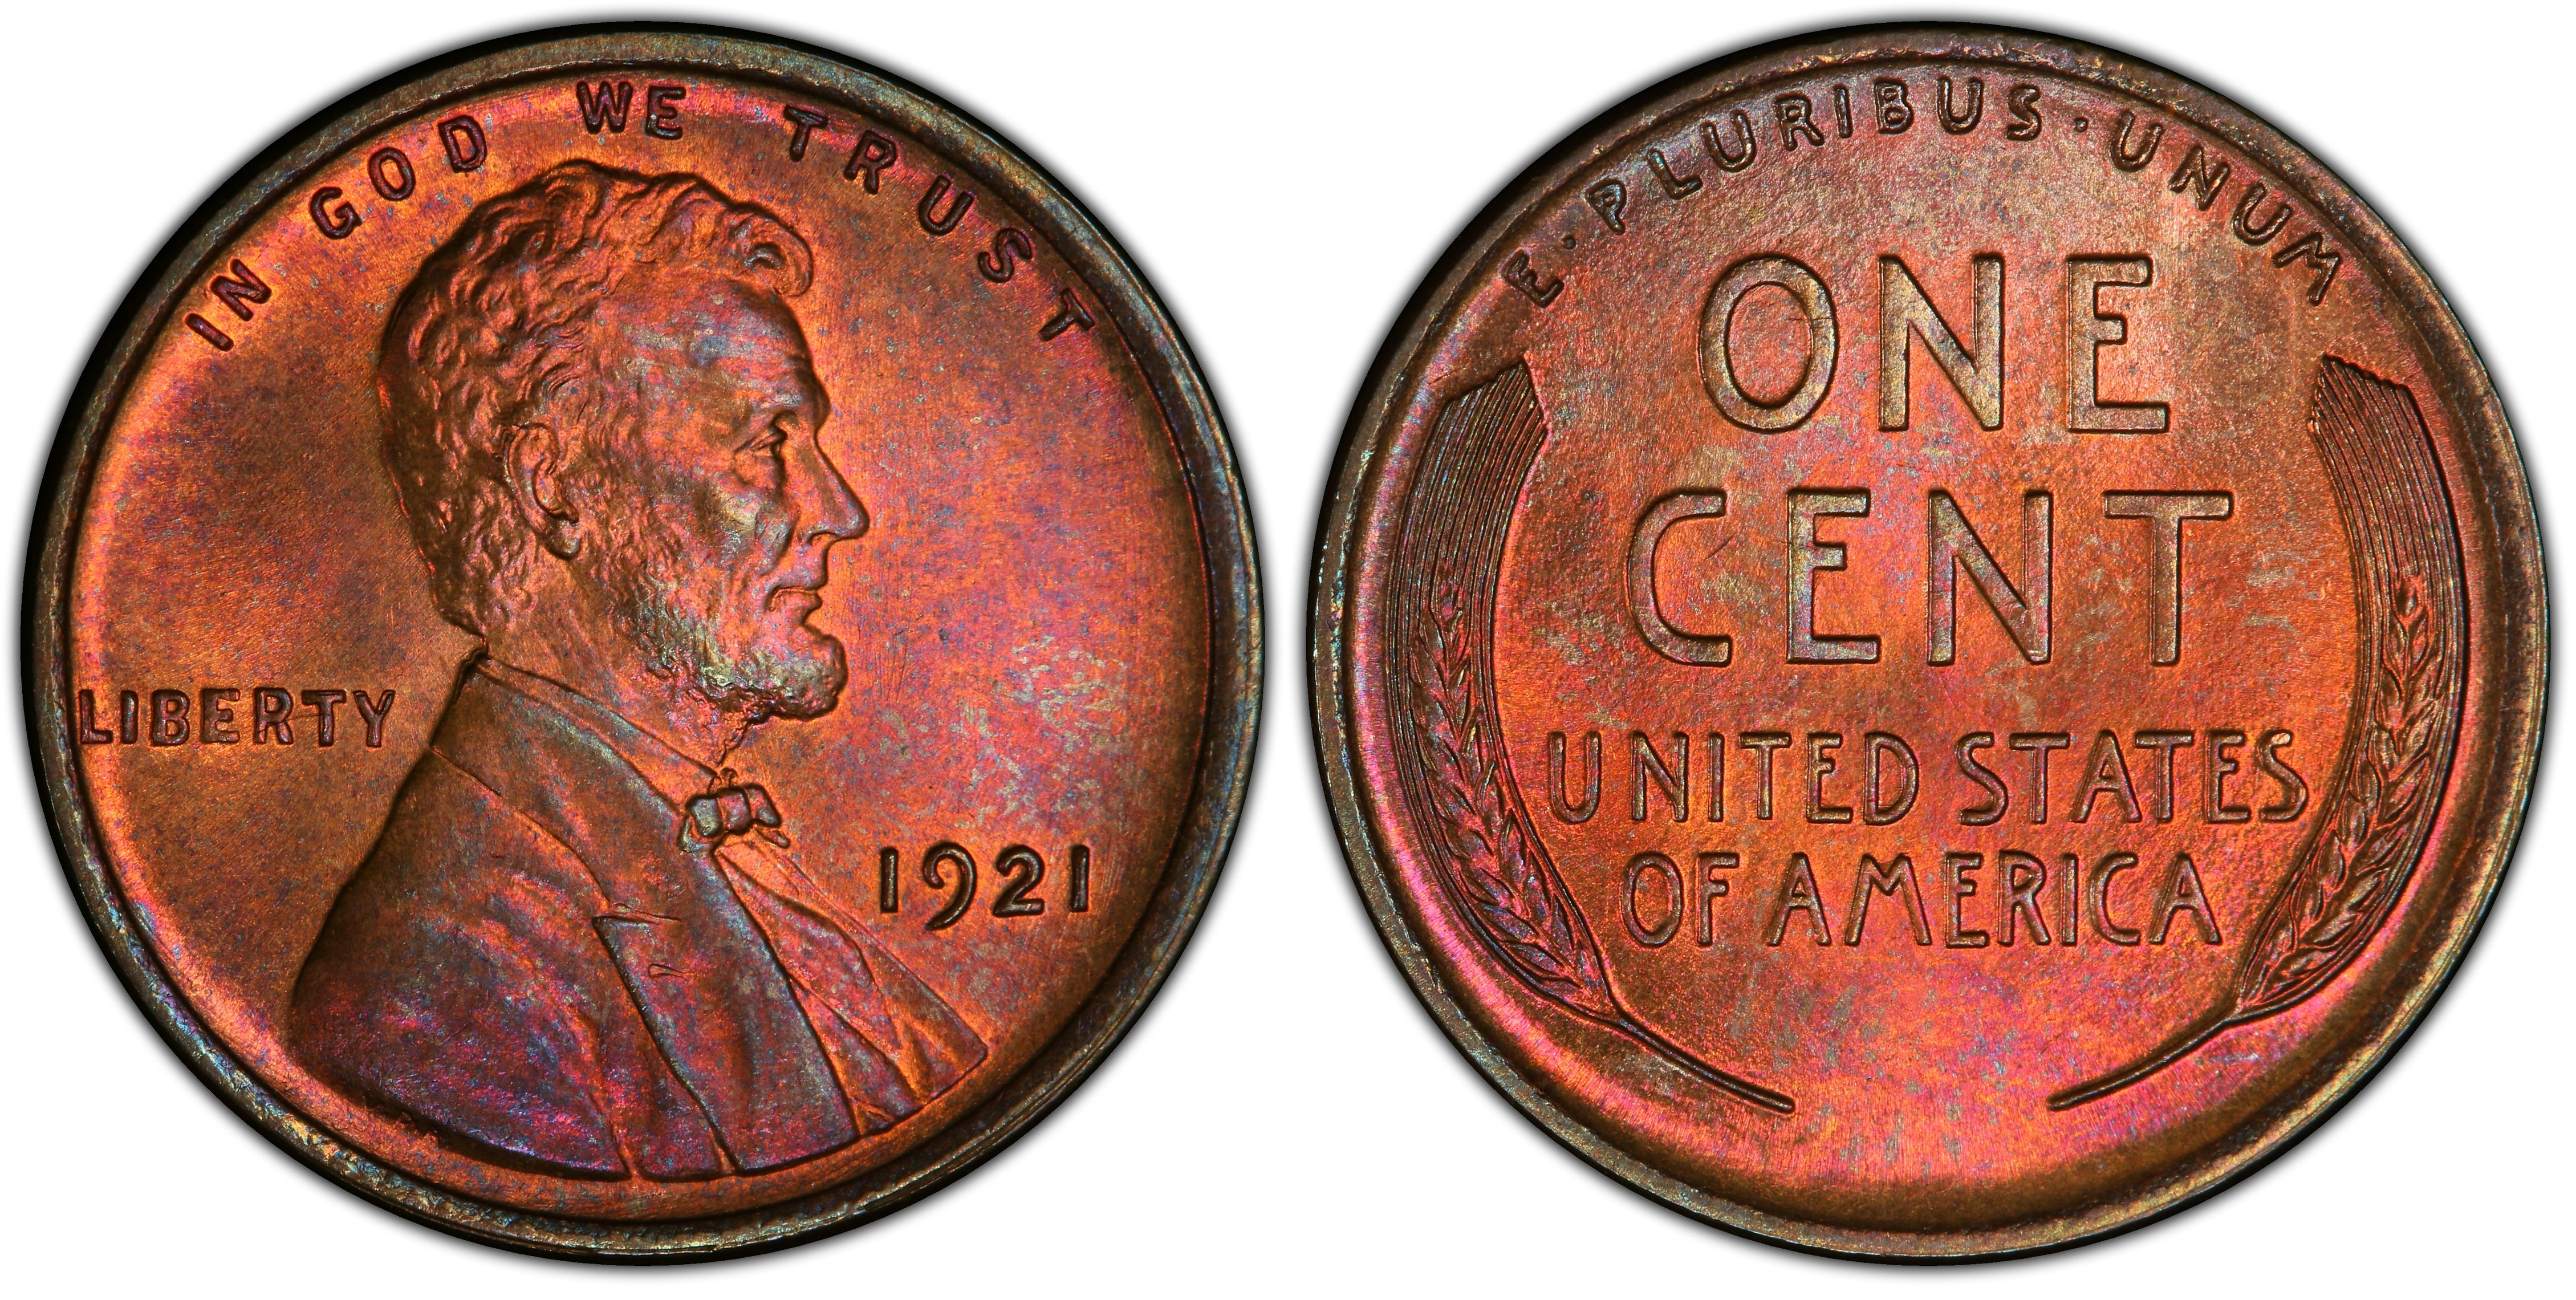 1921 1C, RD (Regular Strike) Lincoln Cent (Wheat Reverse) - PCGS CoinFacts